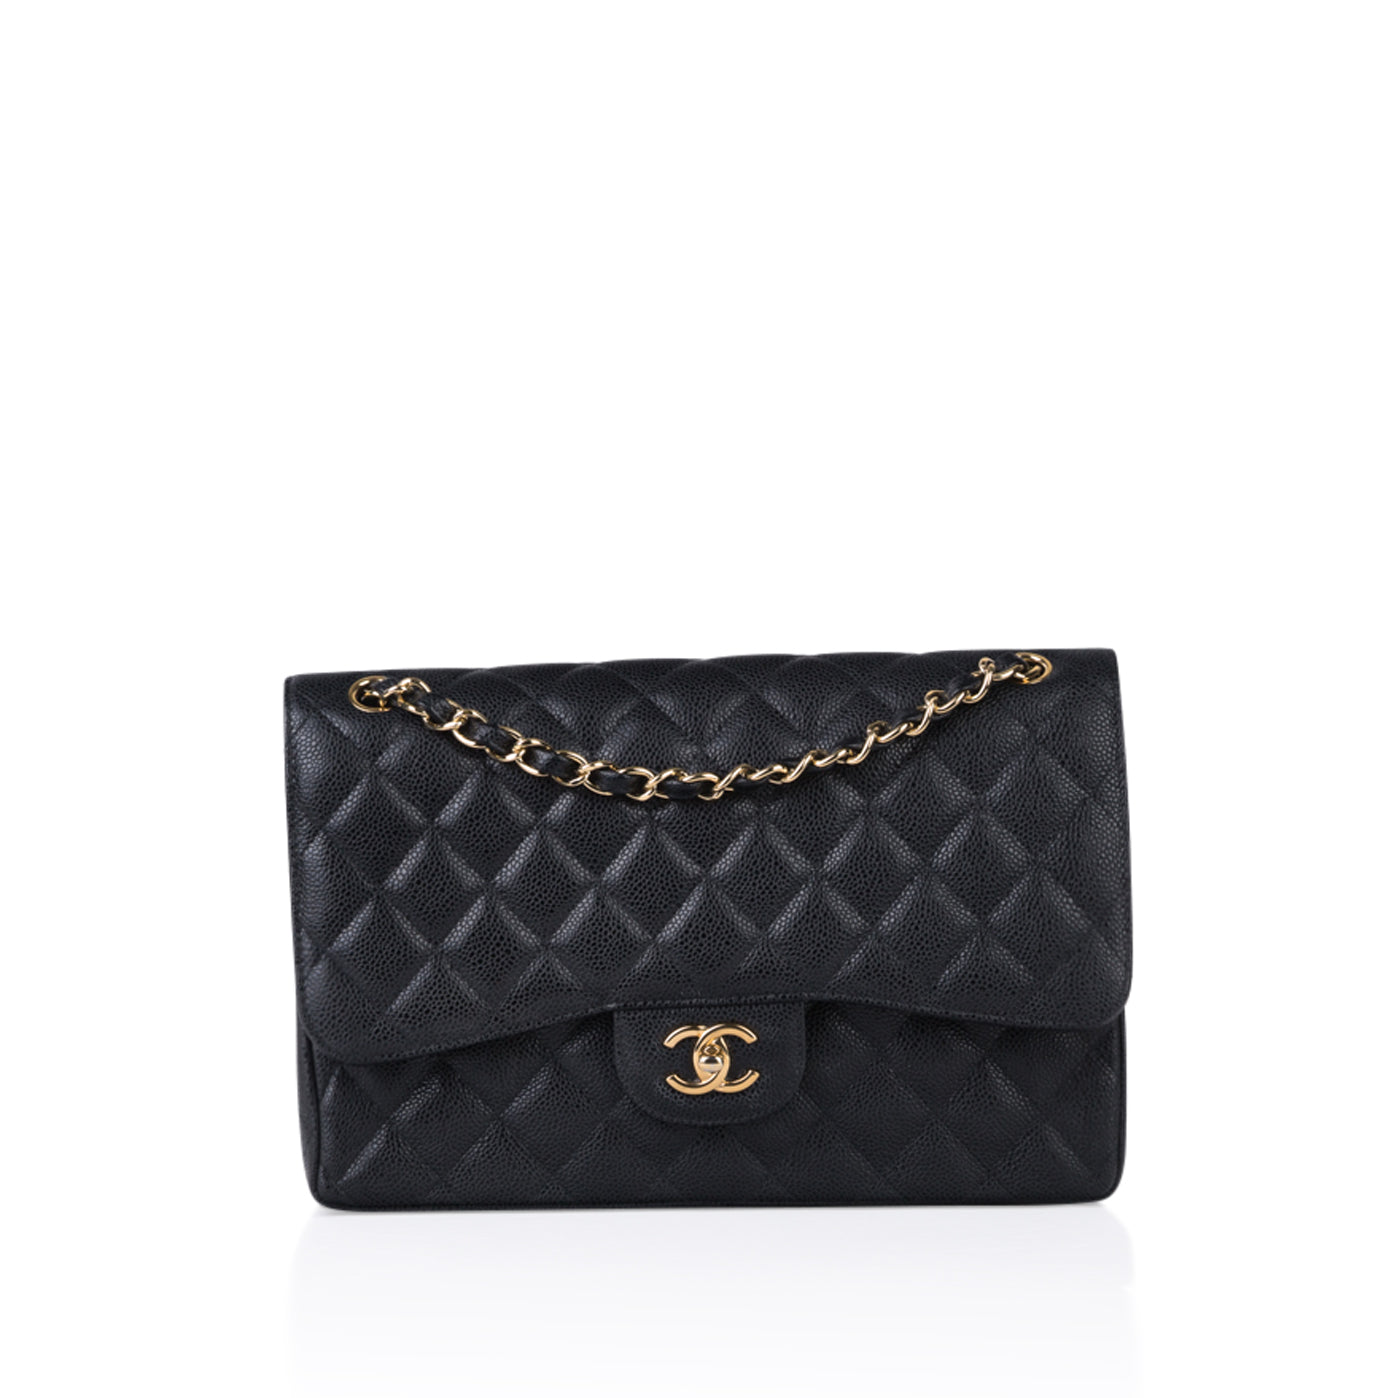 Beige pre-owned Chanel medium 2006-2008 Classic silver hardware